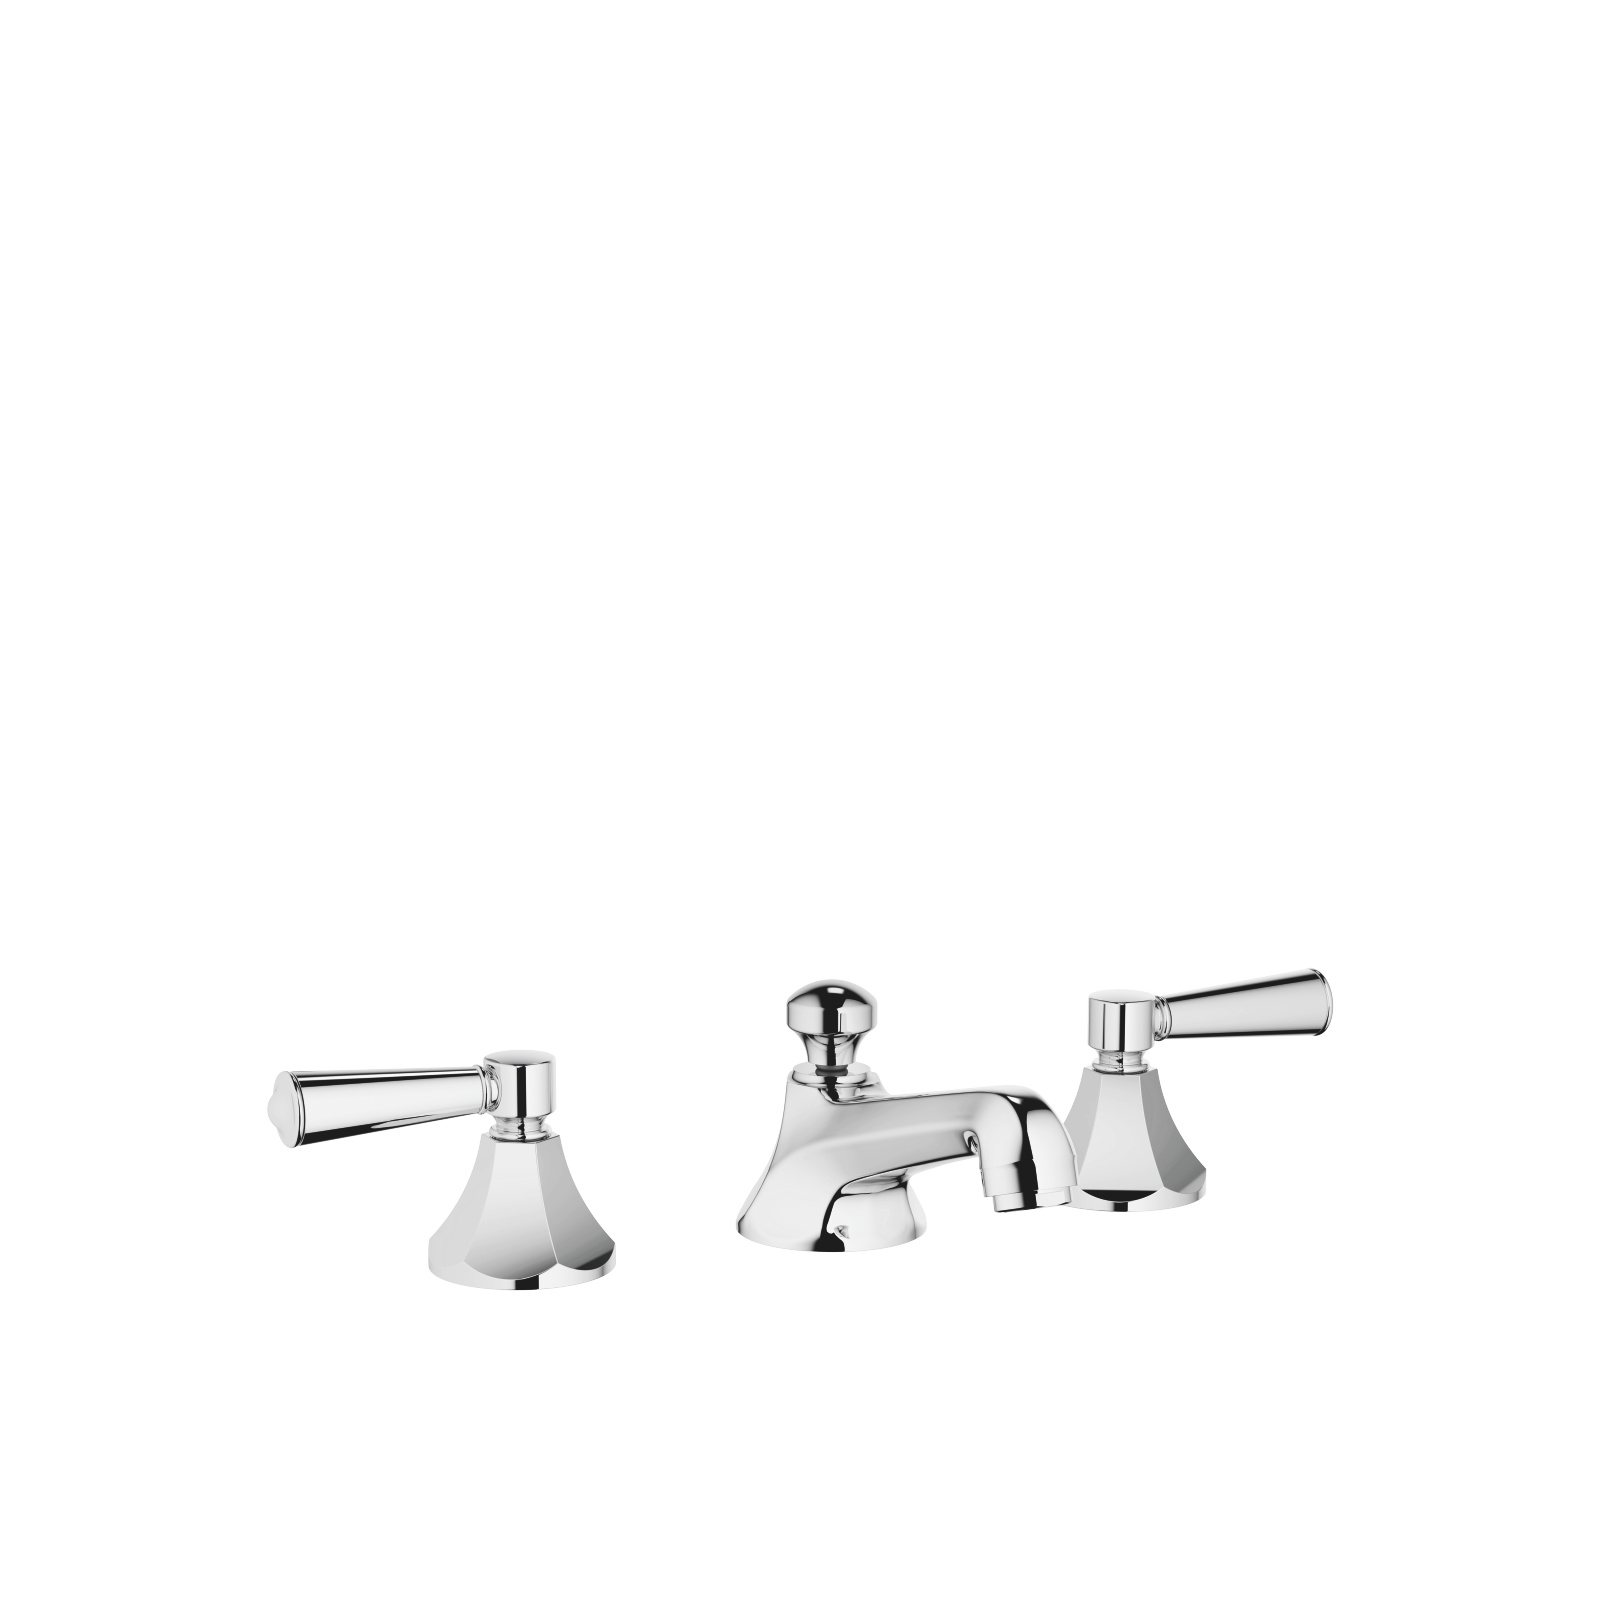 Three-hole basin mixer with pop-up waste - Set containing 3 articles